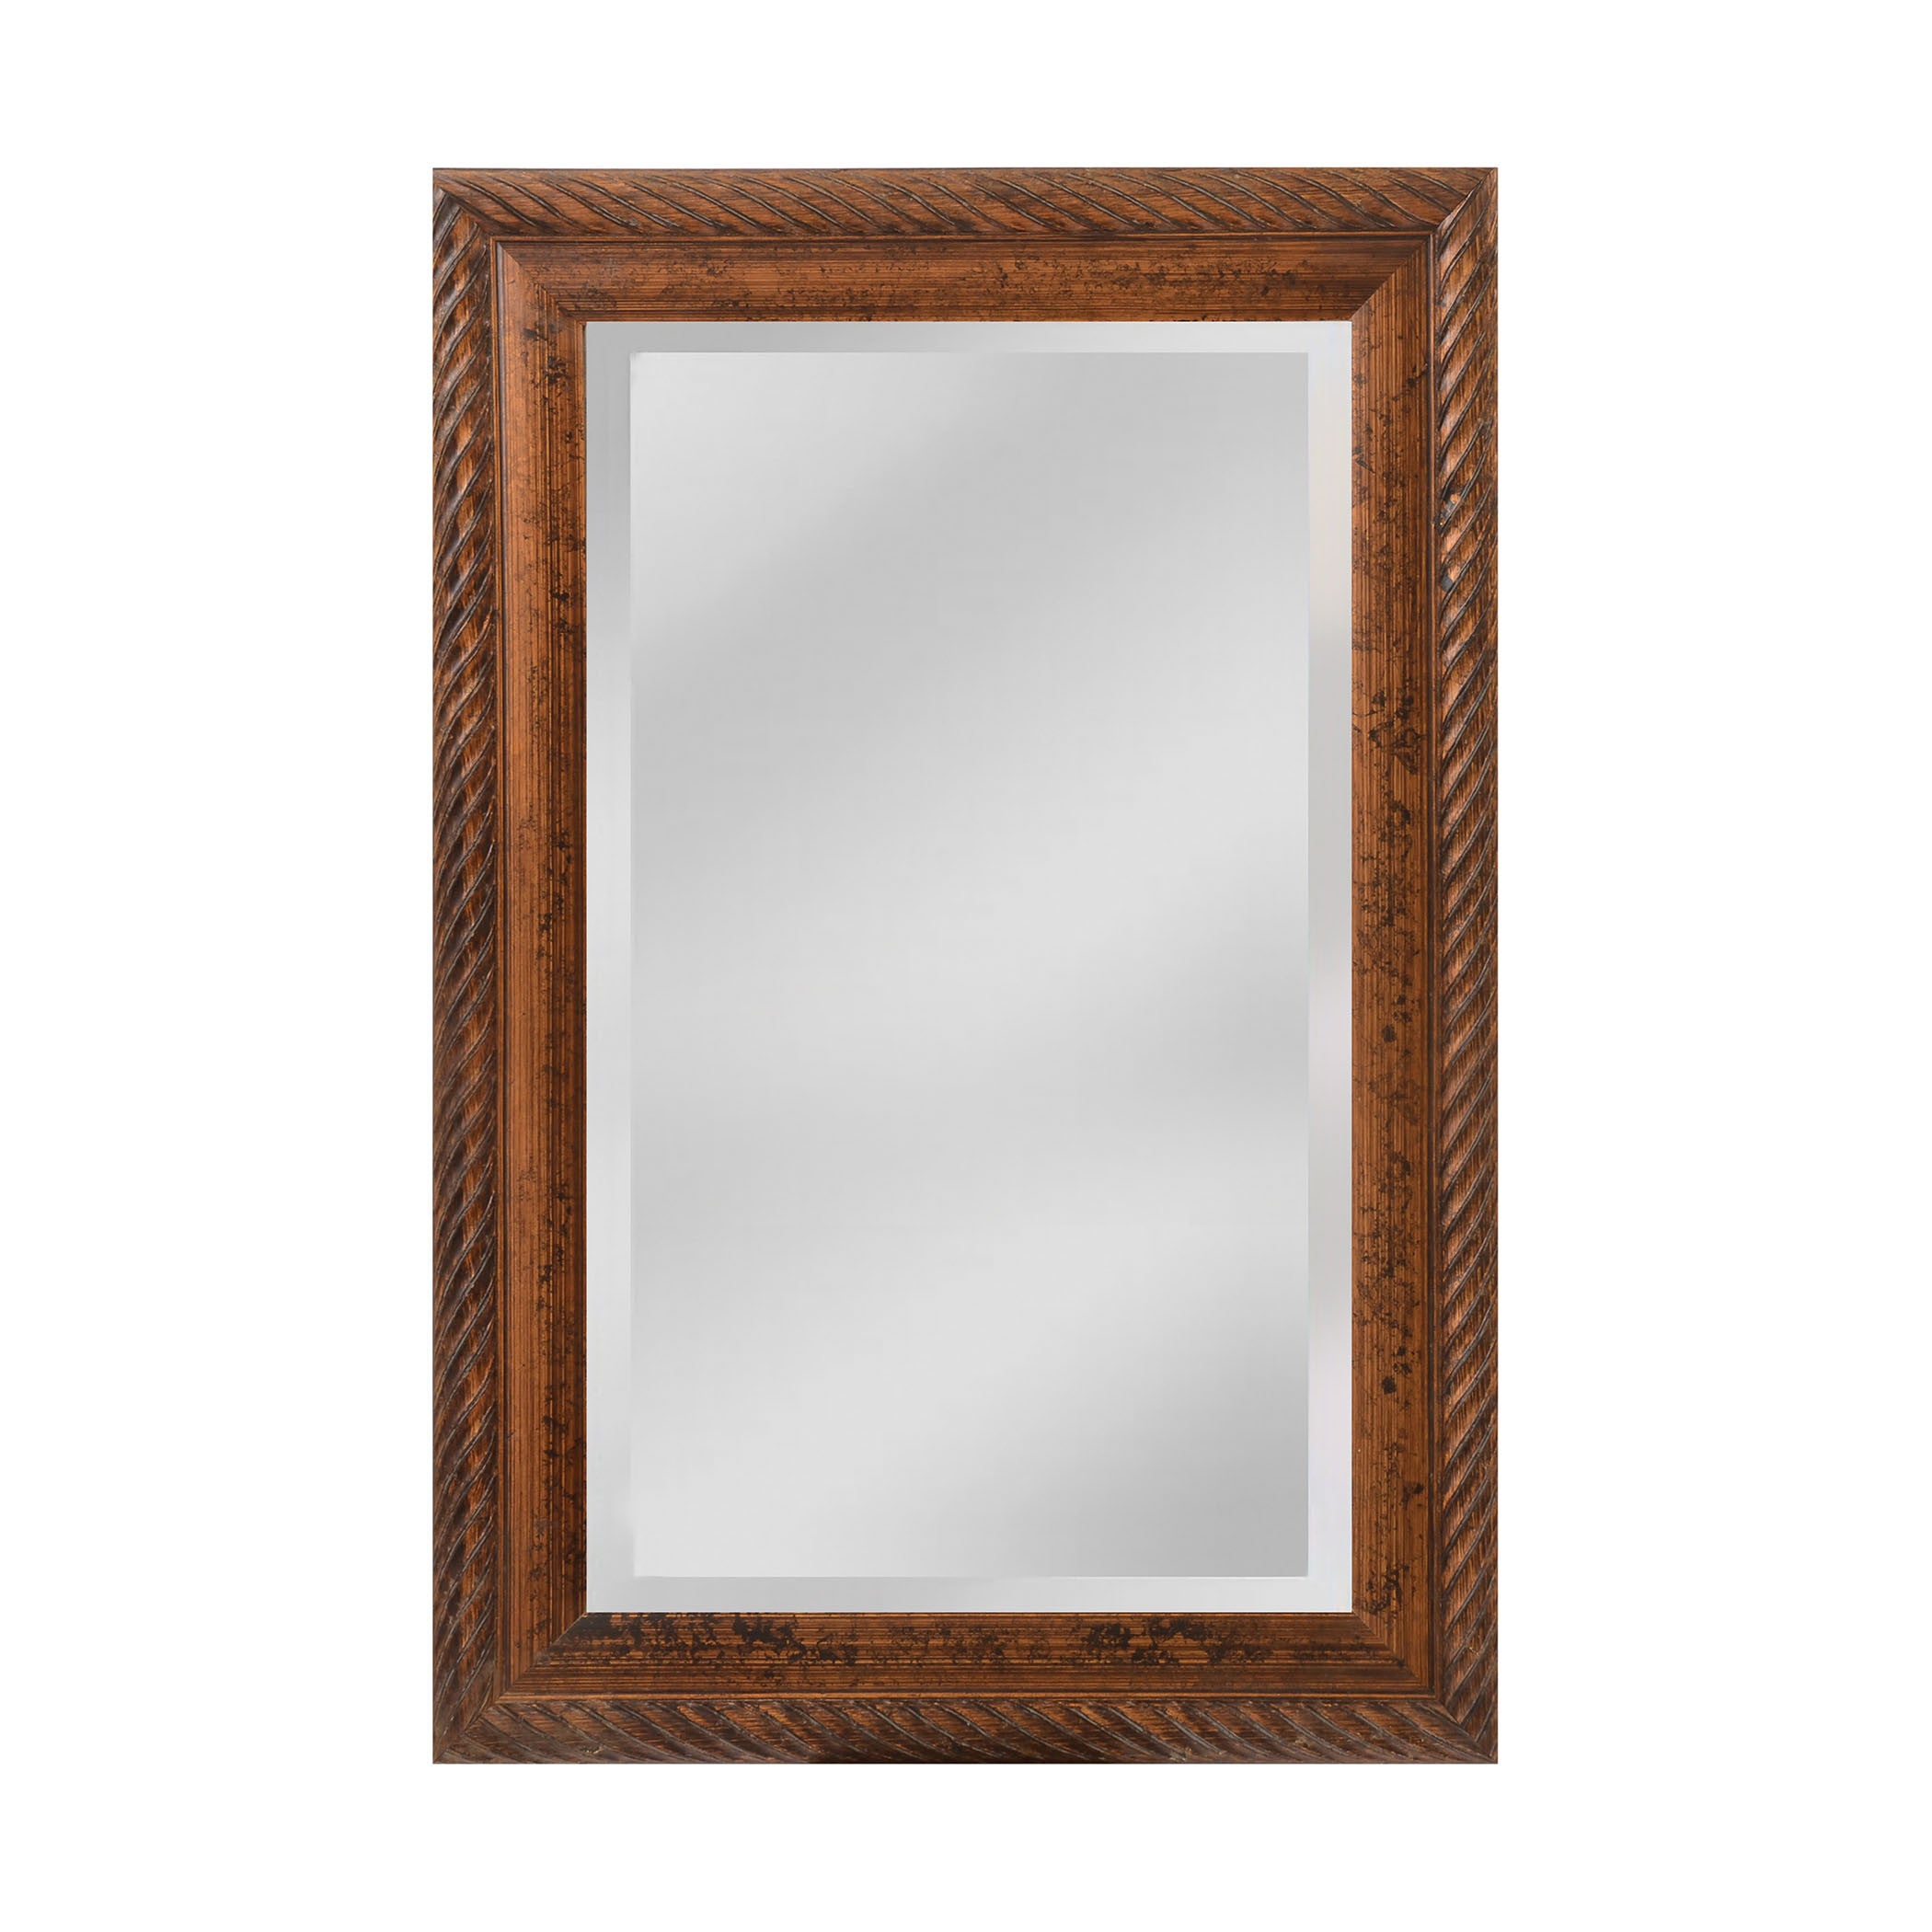 Mirror Masters Mw2050c-0047 Monahan Collection Florentine Light Bronze Finish Wall Mirror